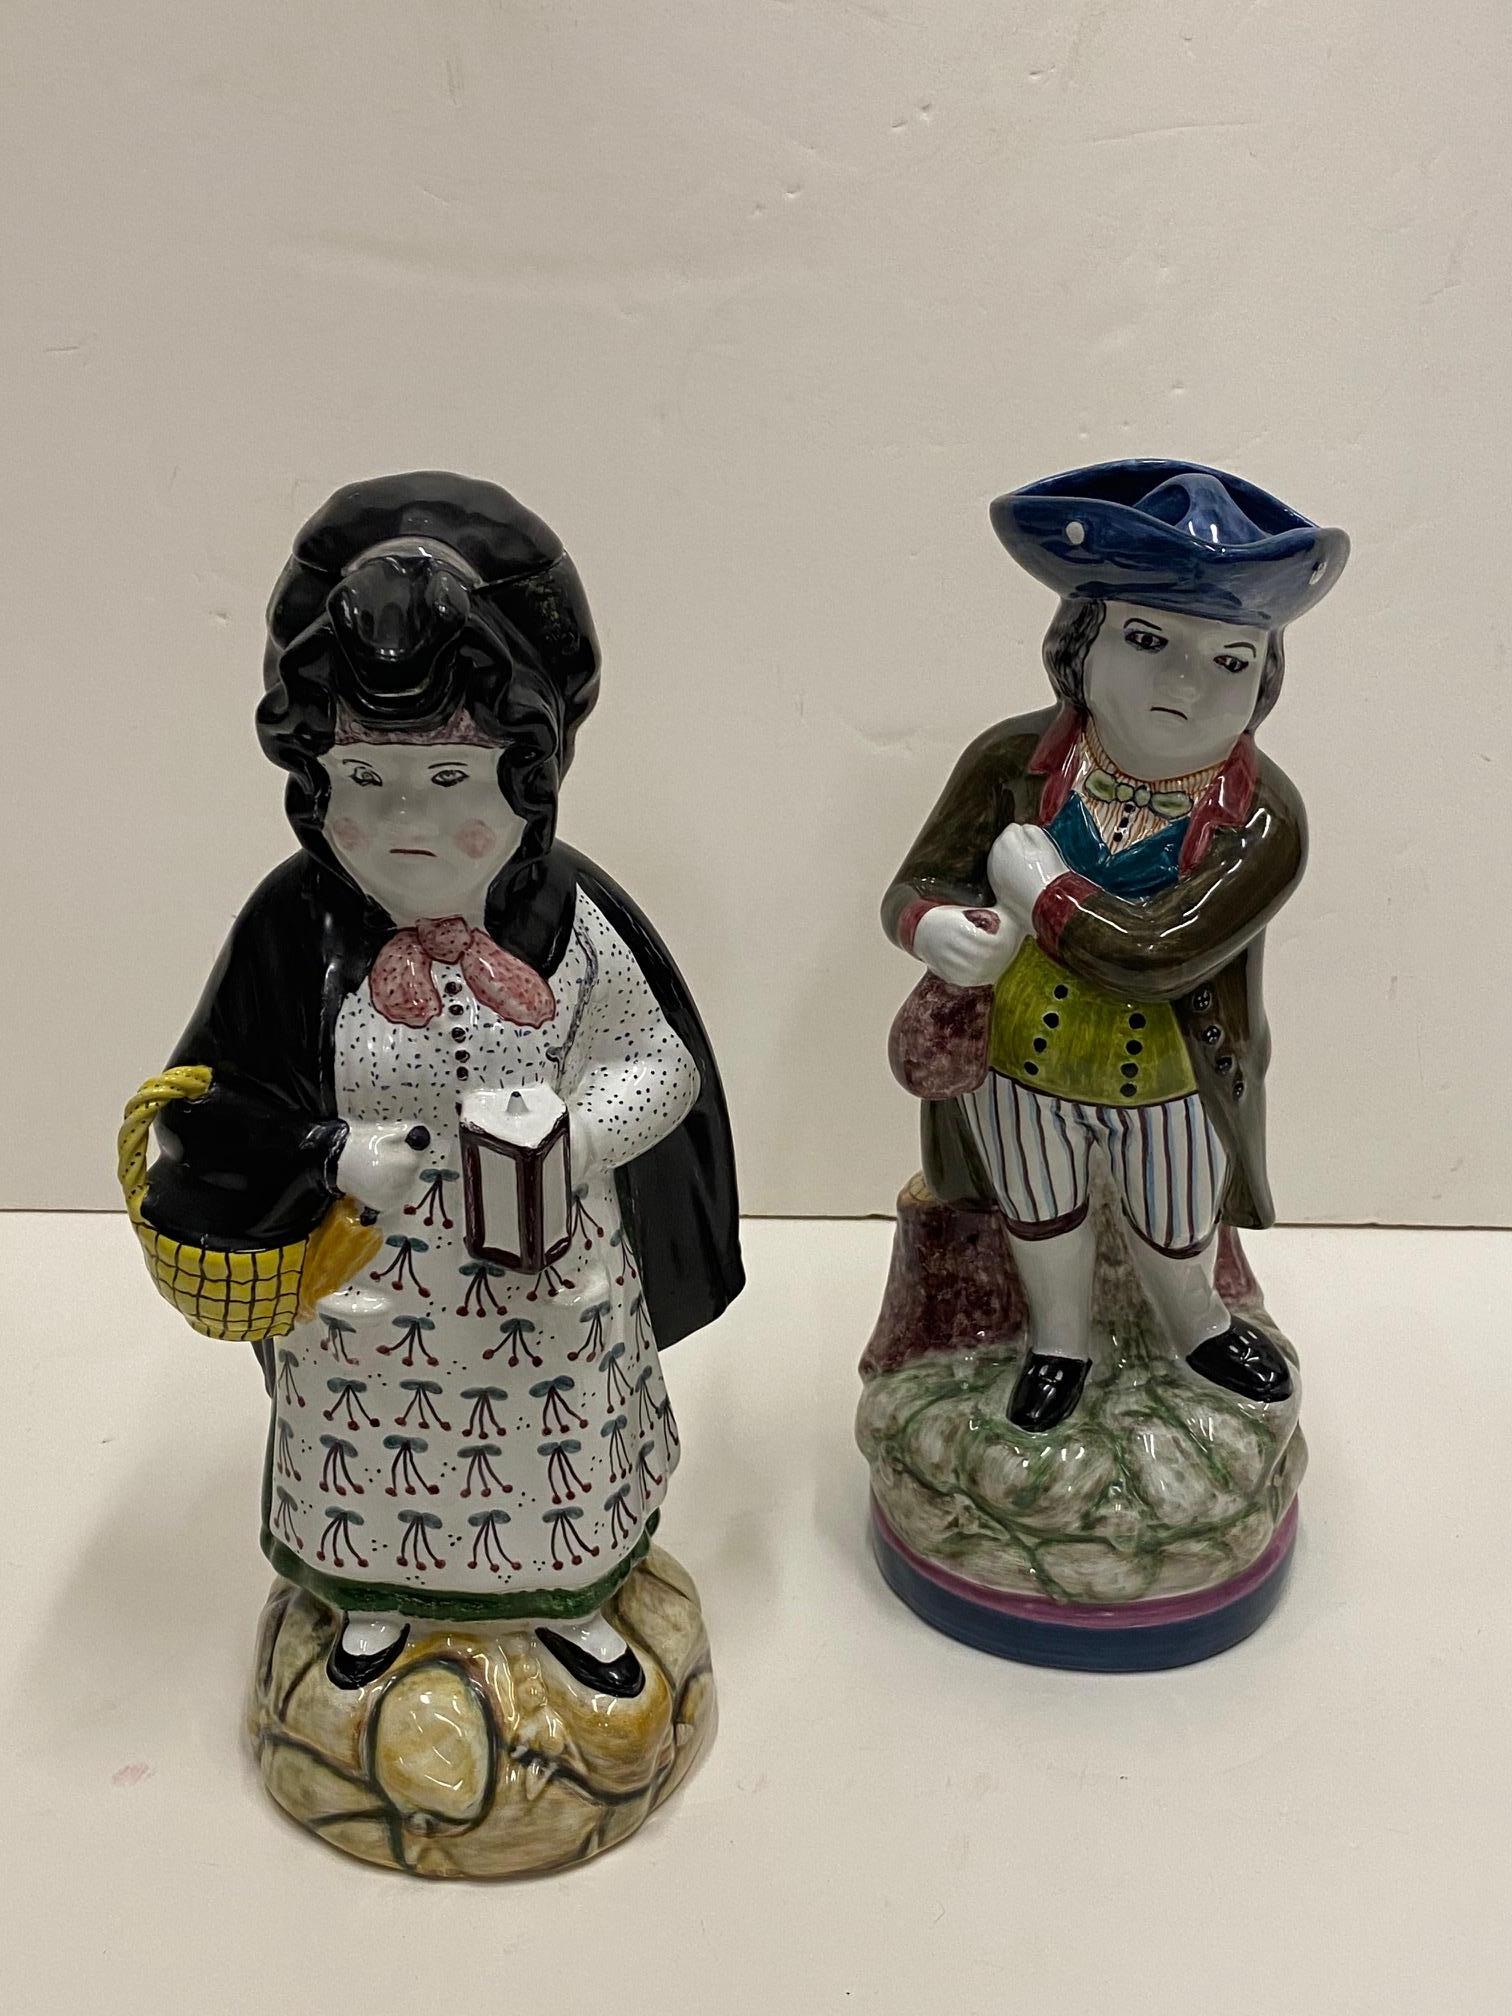 Pair of Portuguese glazed pottery figural toby pitchers that make a handsome couple. The hats come off on both.
Signed on bottom.
female 15 x 7.